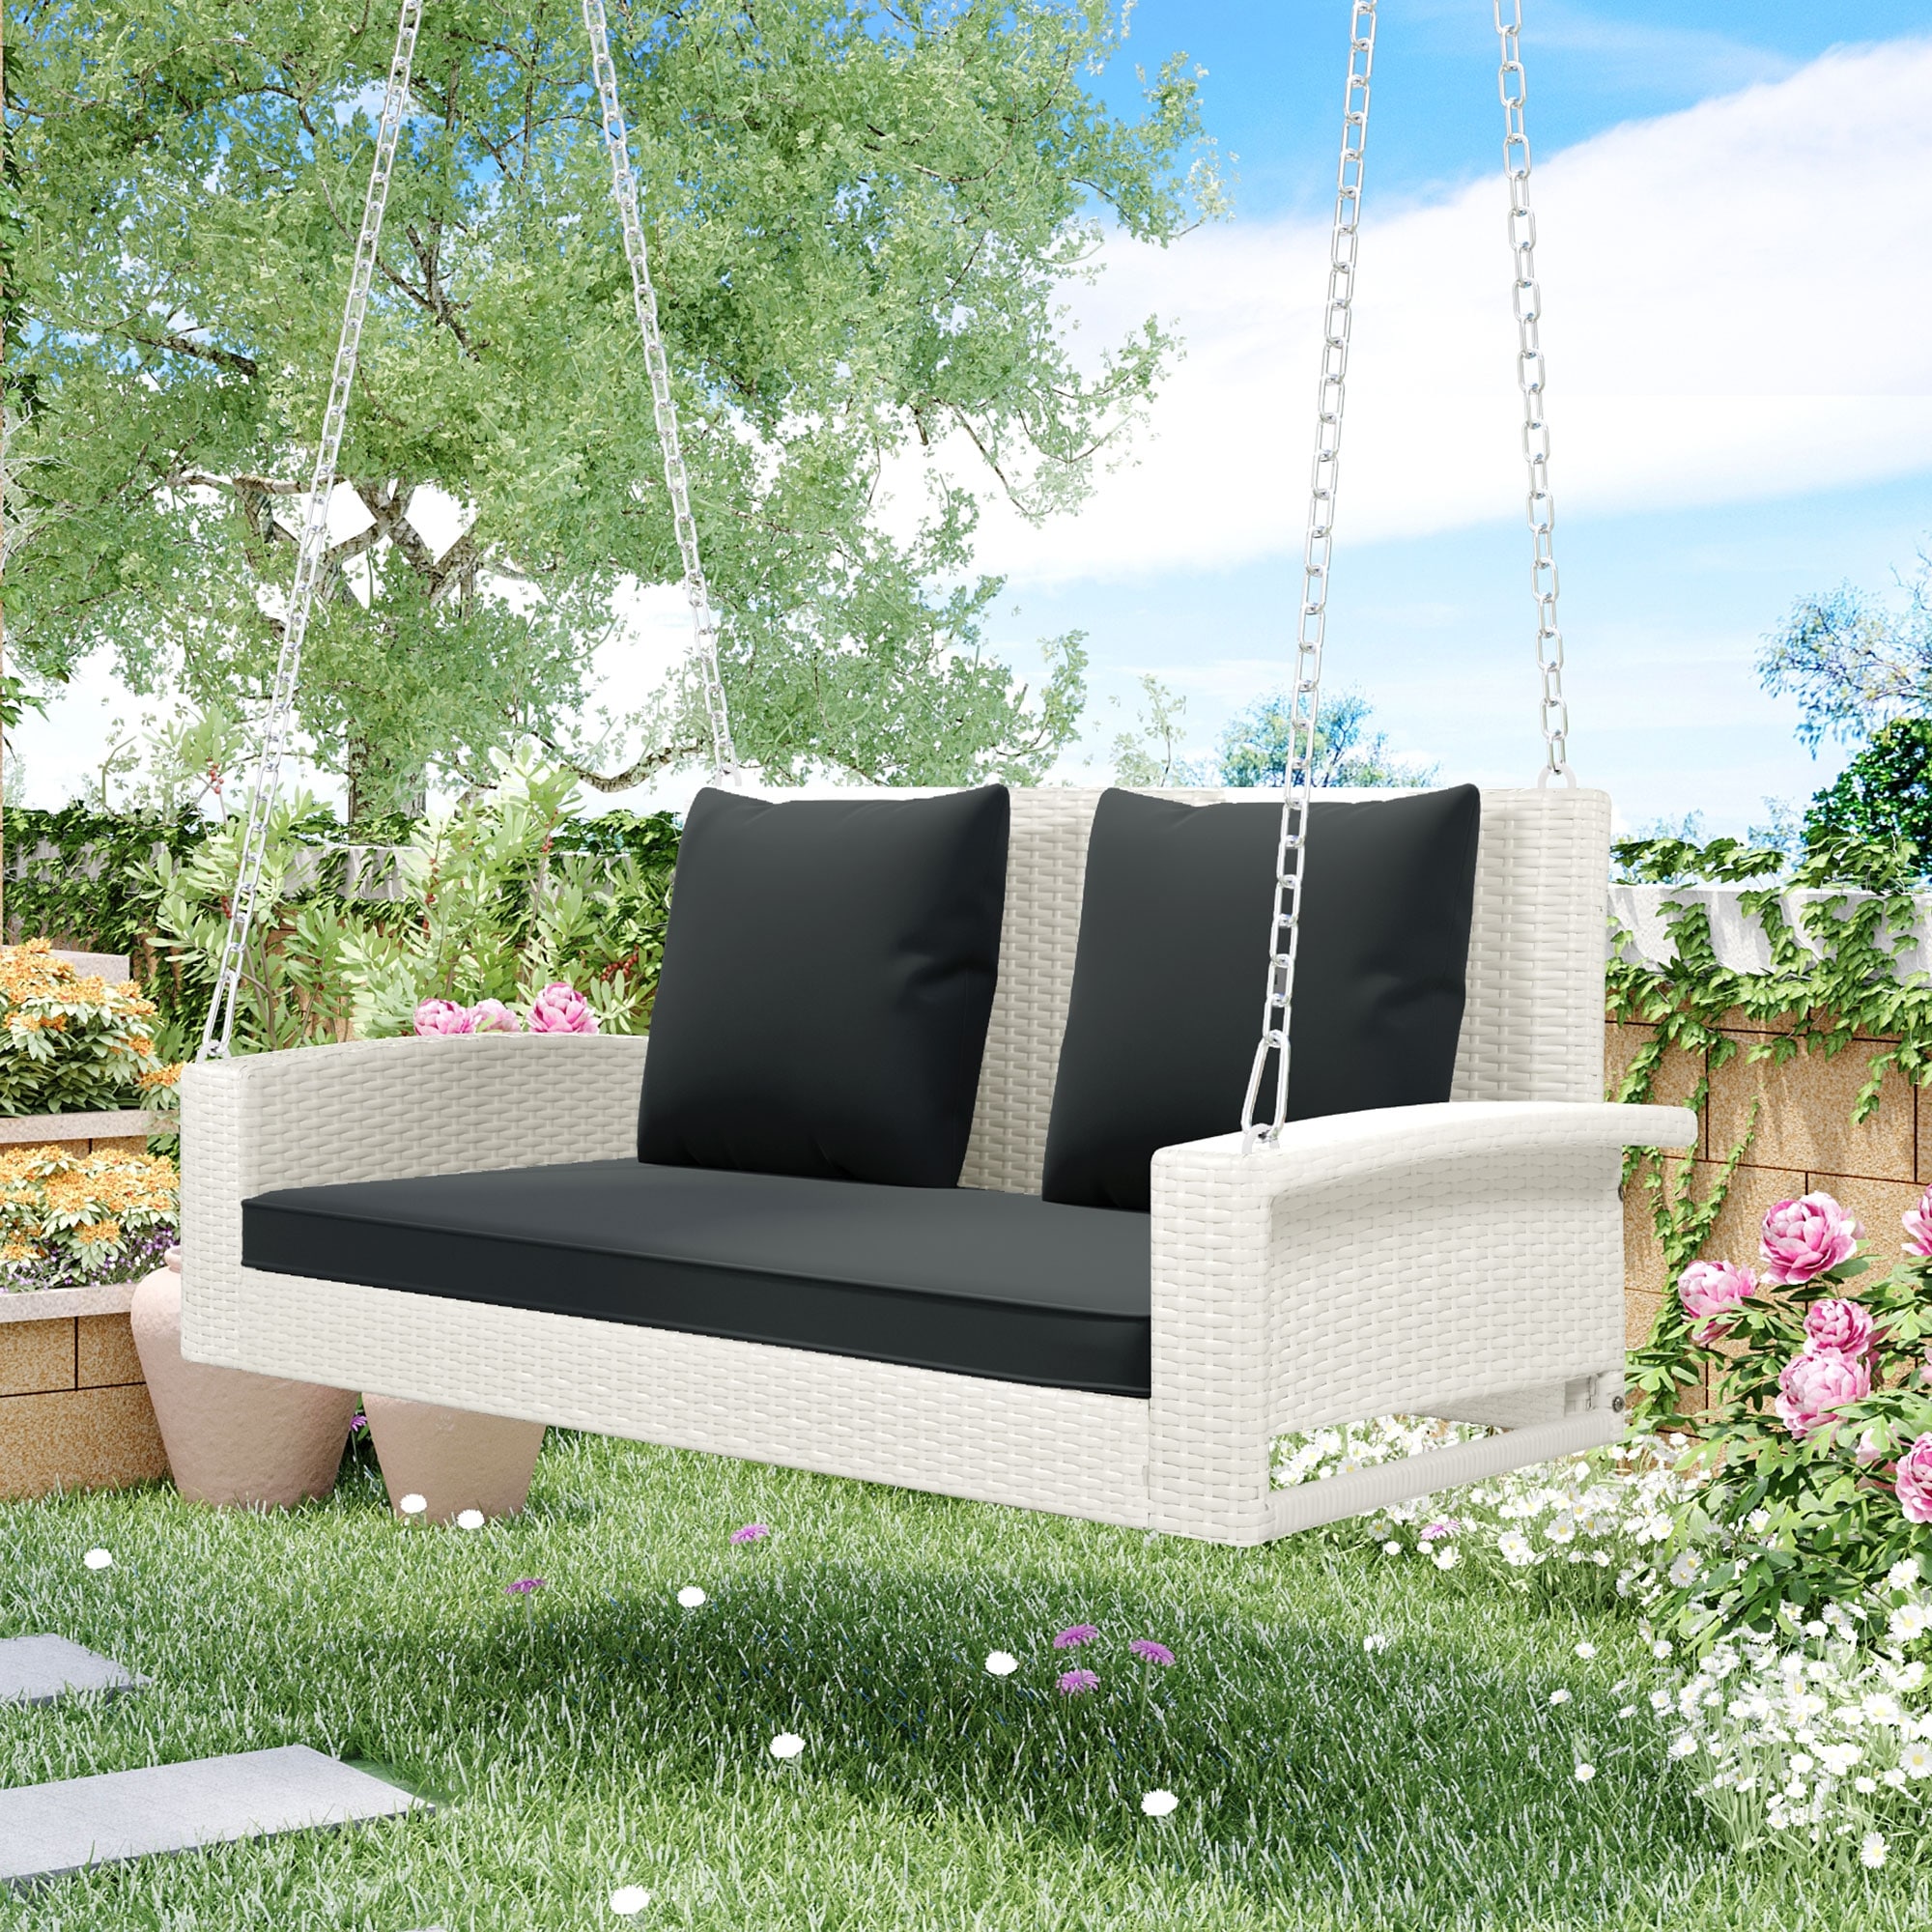 2-Person Wicker Porch Swing, Modern Rocking Porch Swing with Chains Cushion Pillow Bench for Garden Backyard